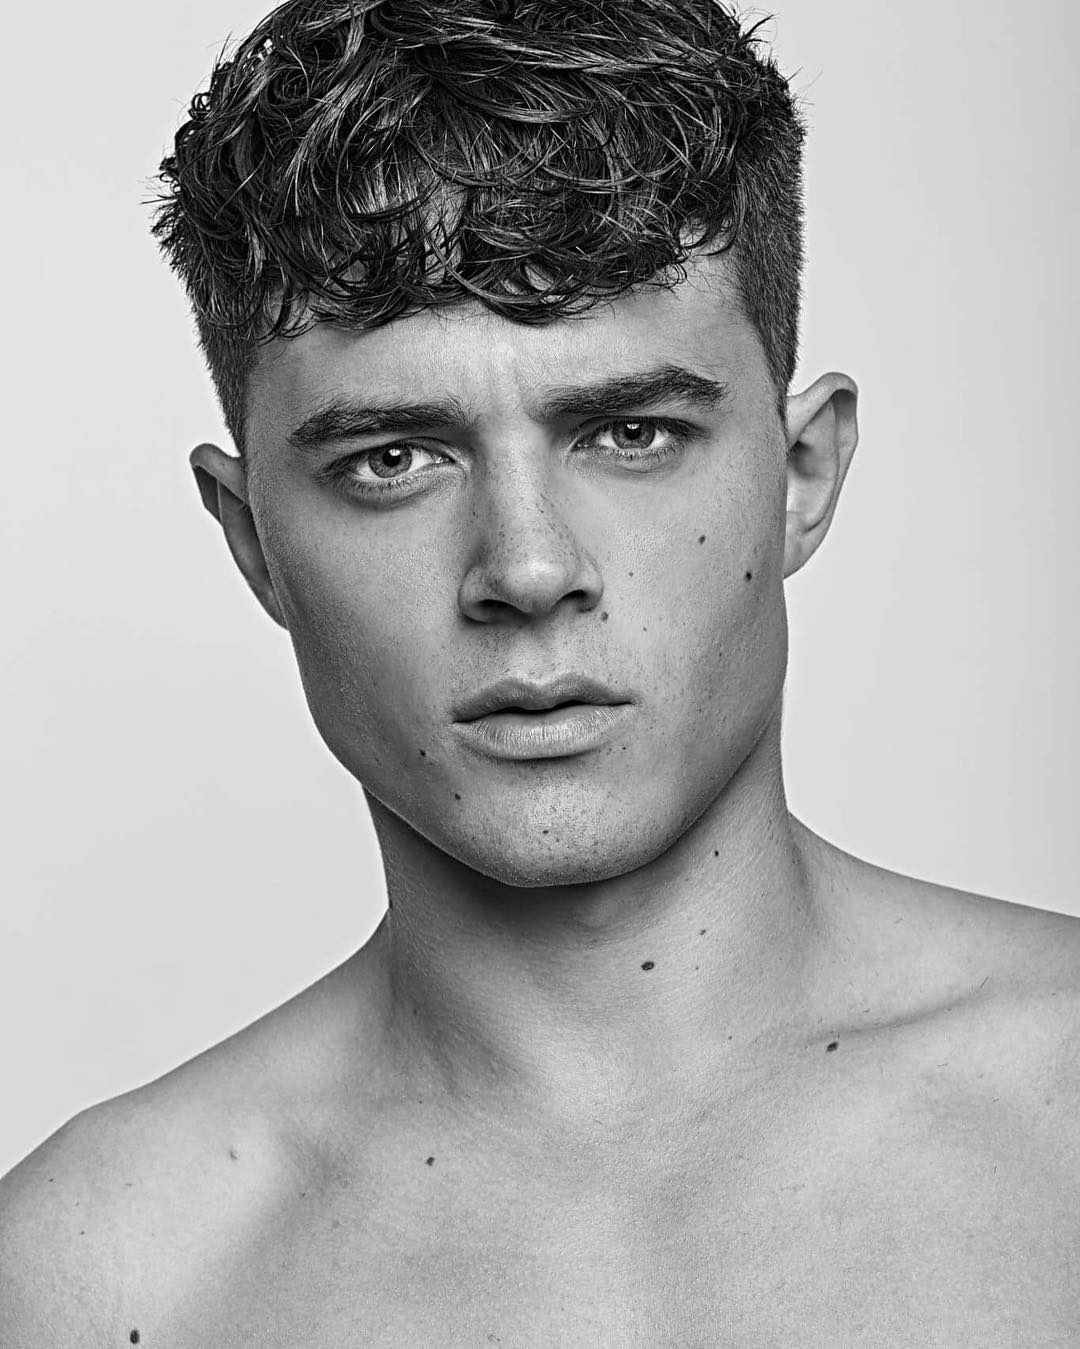 The 50 Best Curly Hair Men's Haircuts + Hairstyles of 2018